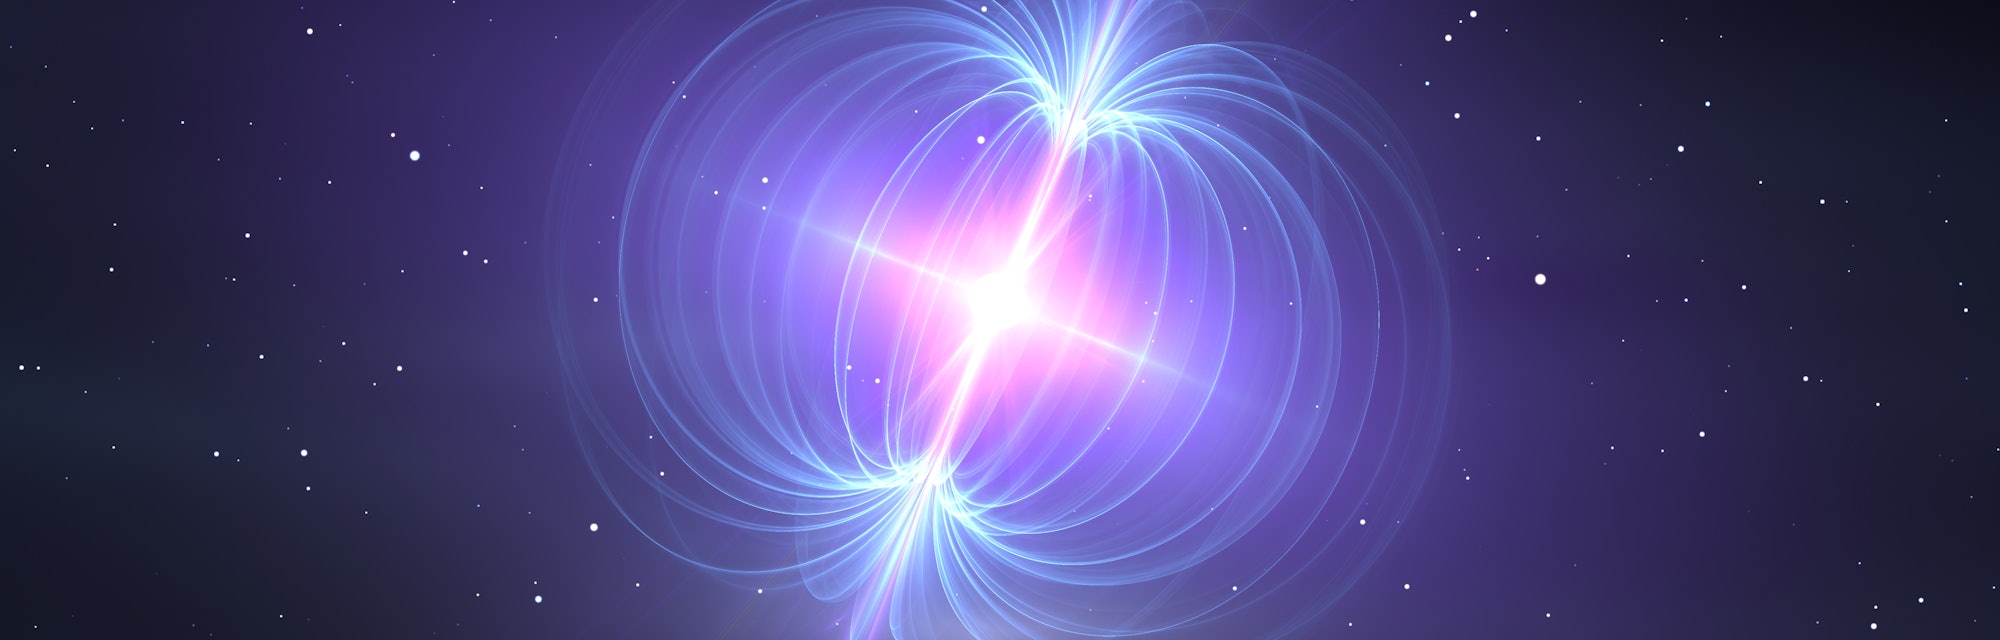 Magnetar - neutron star with an extremely powerful magnetic field. 3d rendering